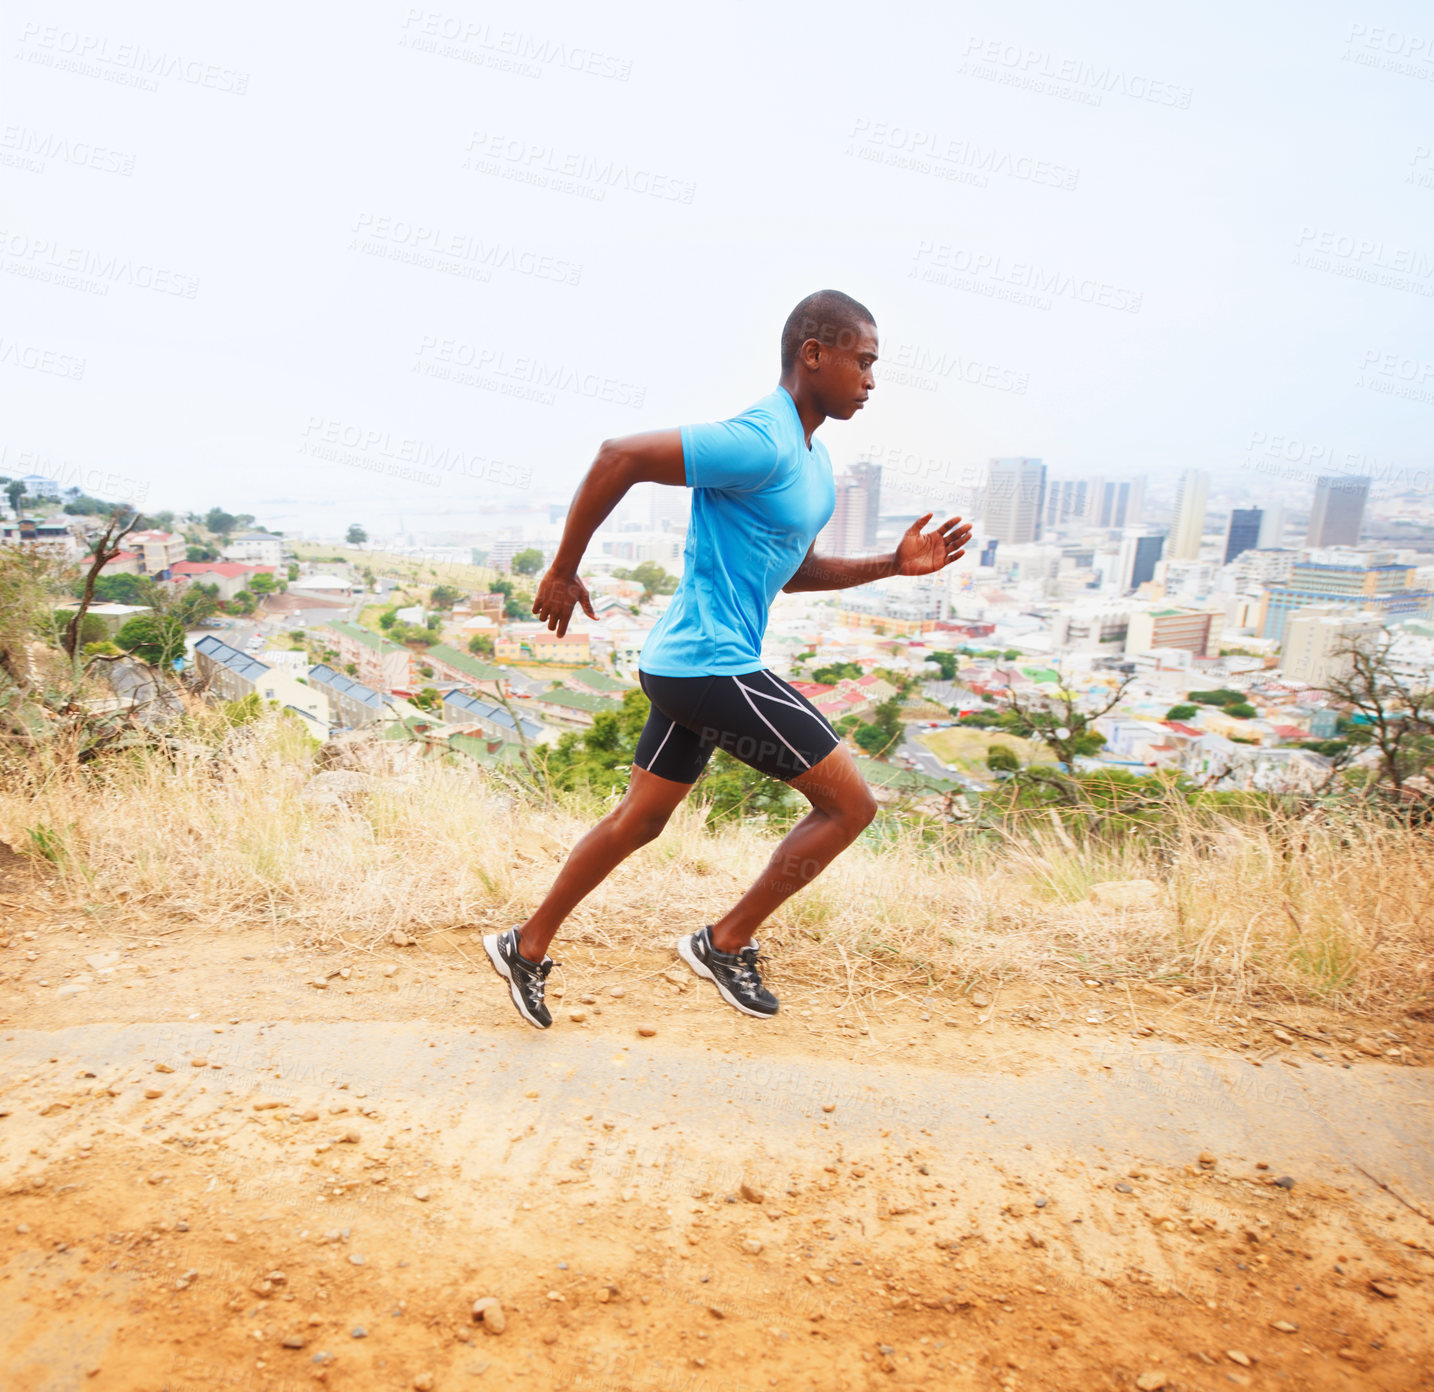 Buy stock photo A young man running along a nature trail with the city in the background